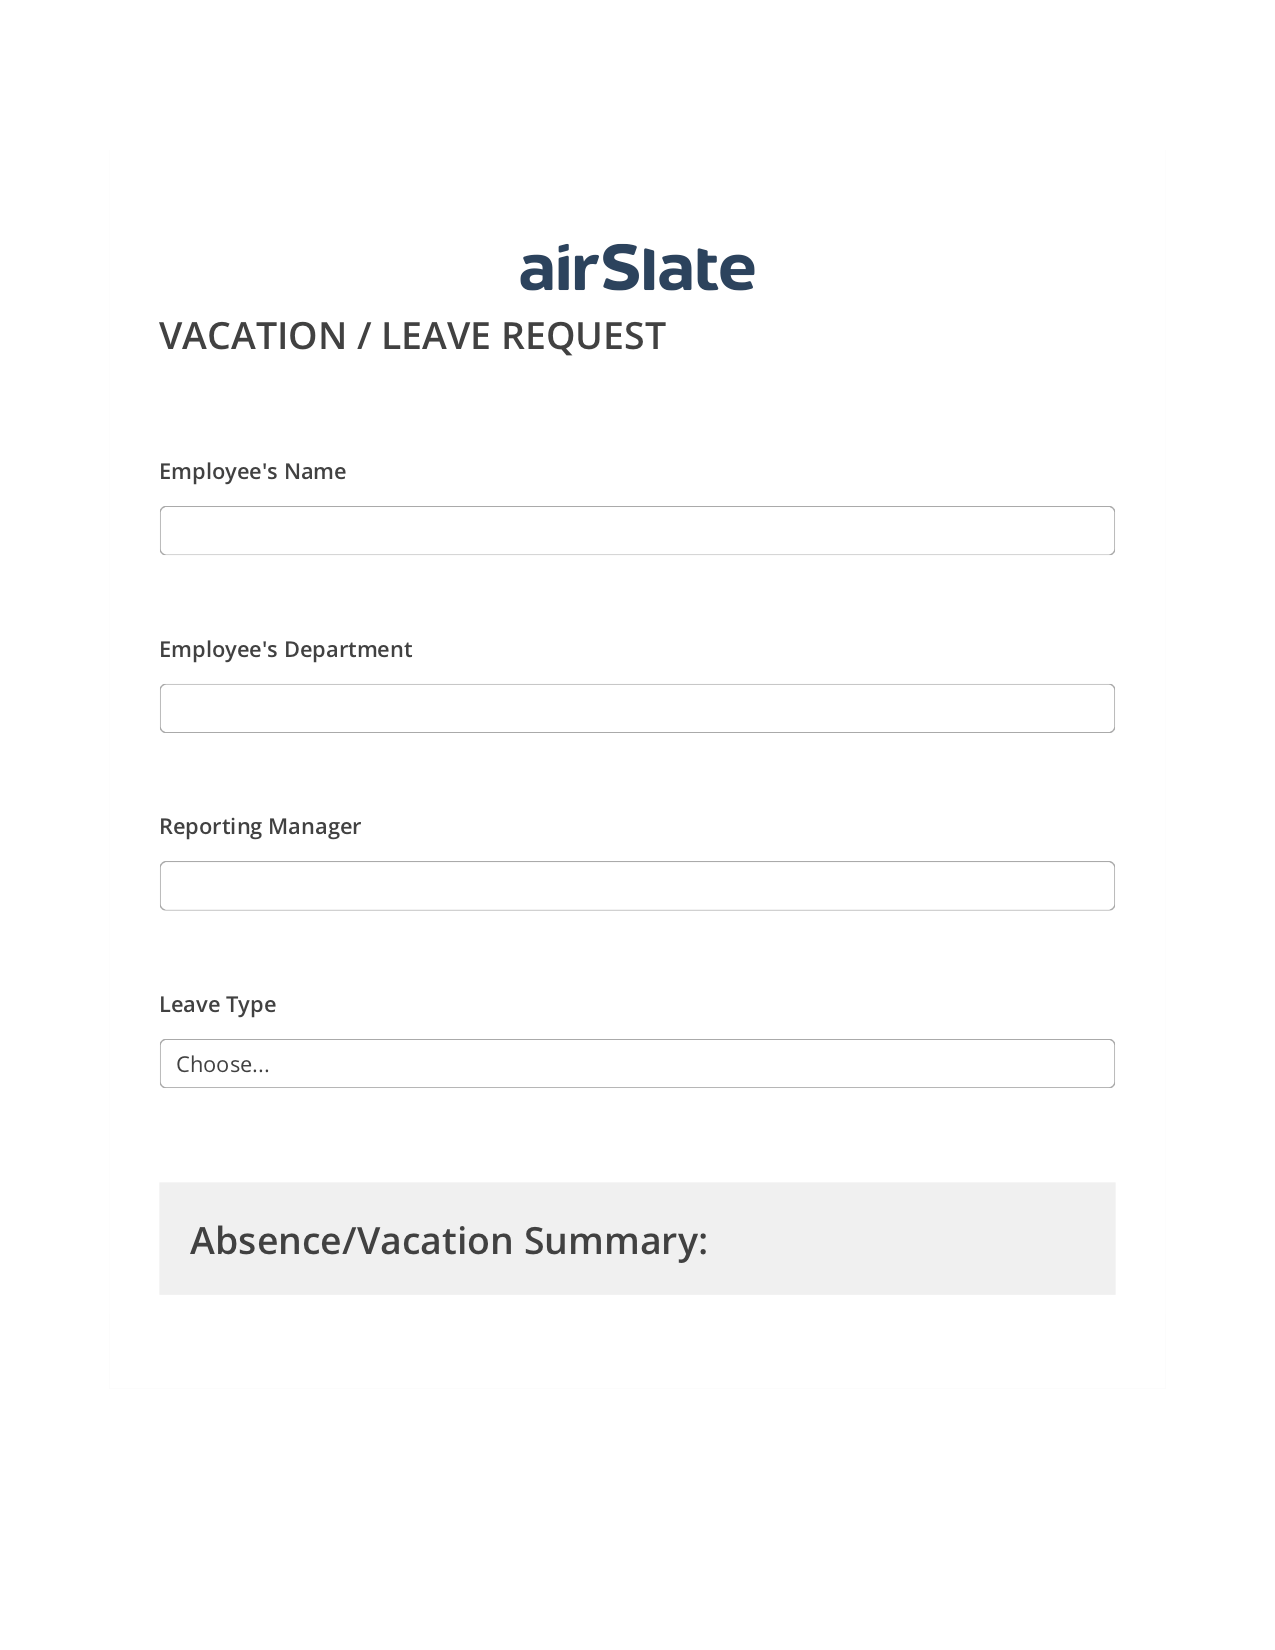 Vacation/Leave Request Workflow Pre-fill Dropdowns from CSV file Bot, Create NetSuite Record bot, Archive to OneDrive Bot